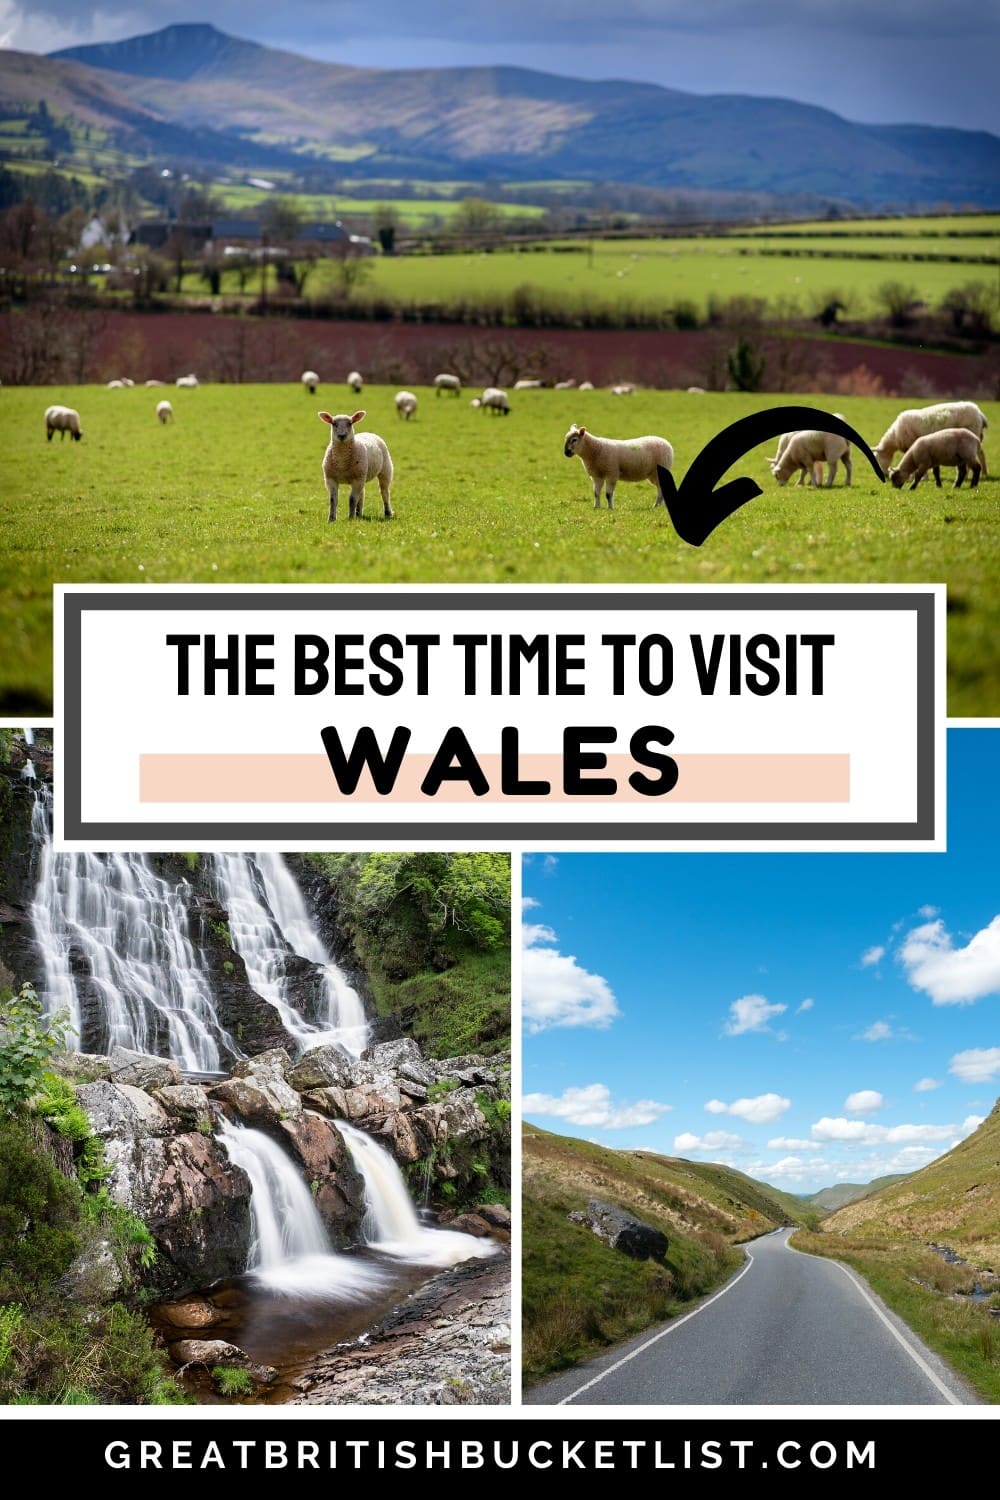 When Is The Best Time To Visit Wales?